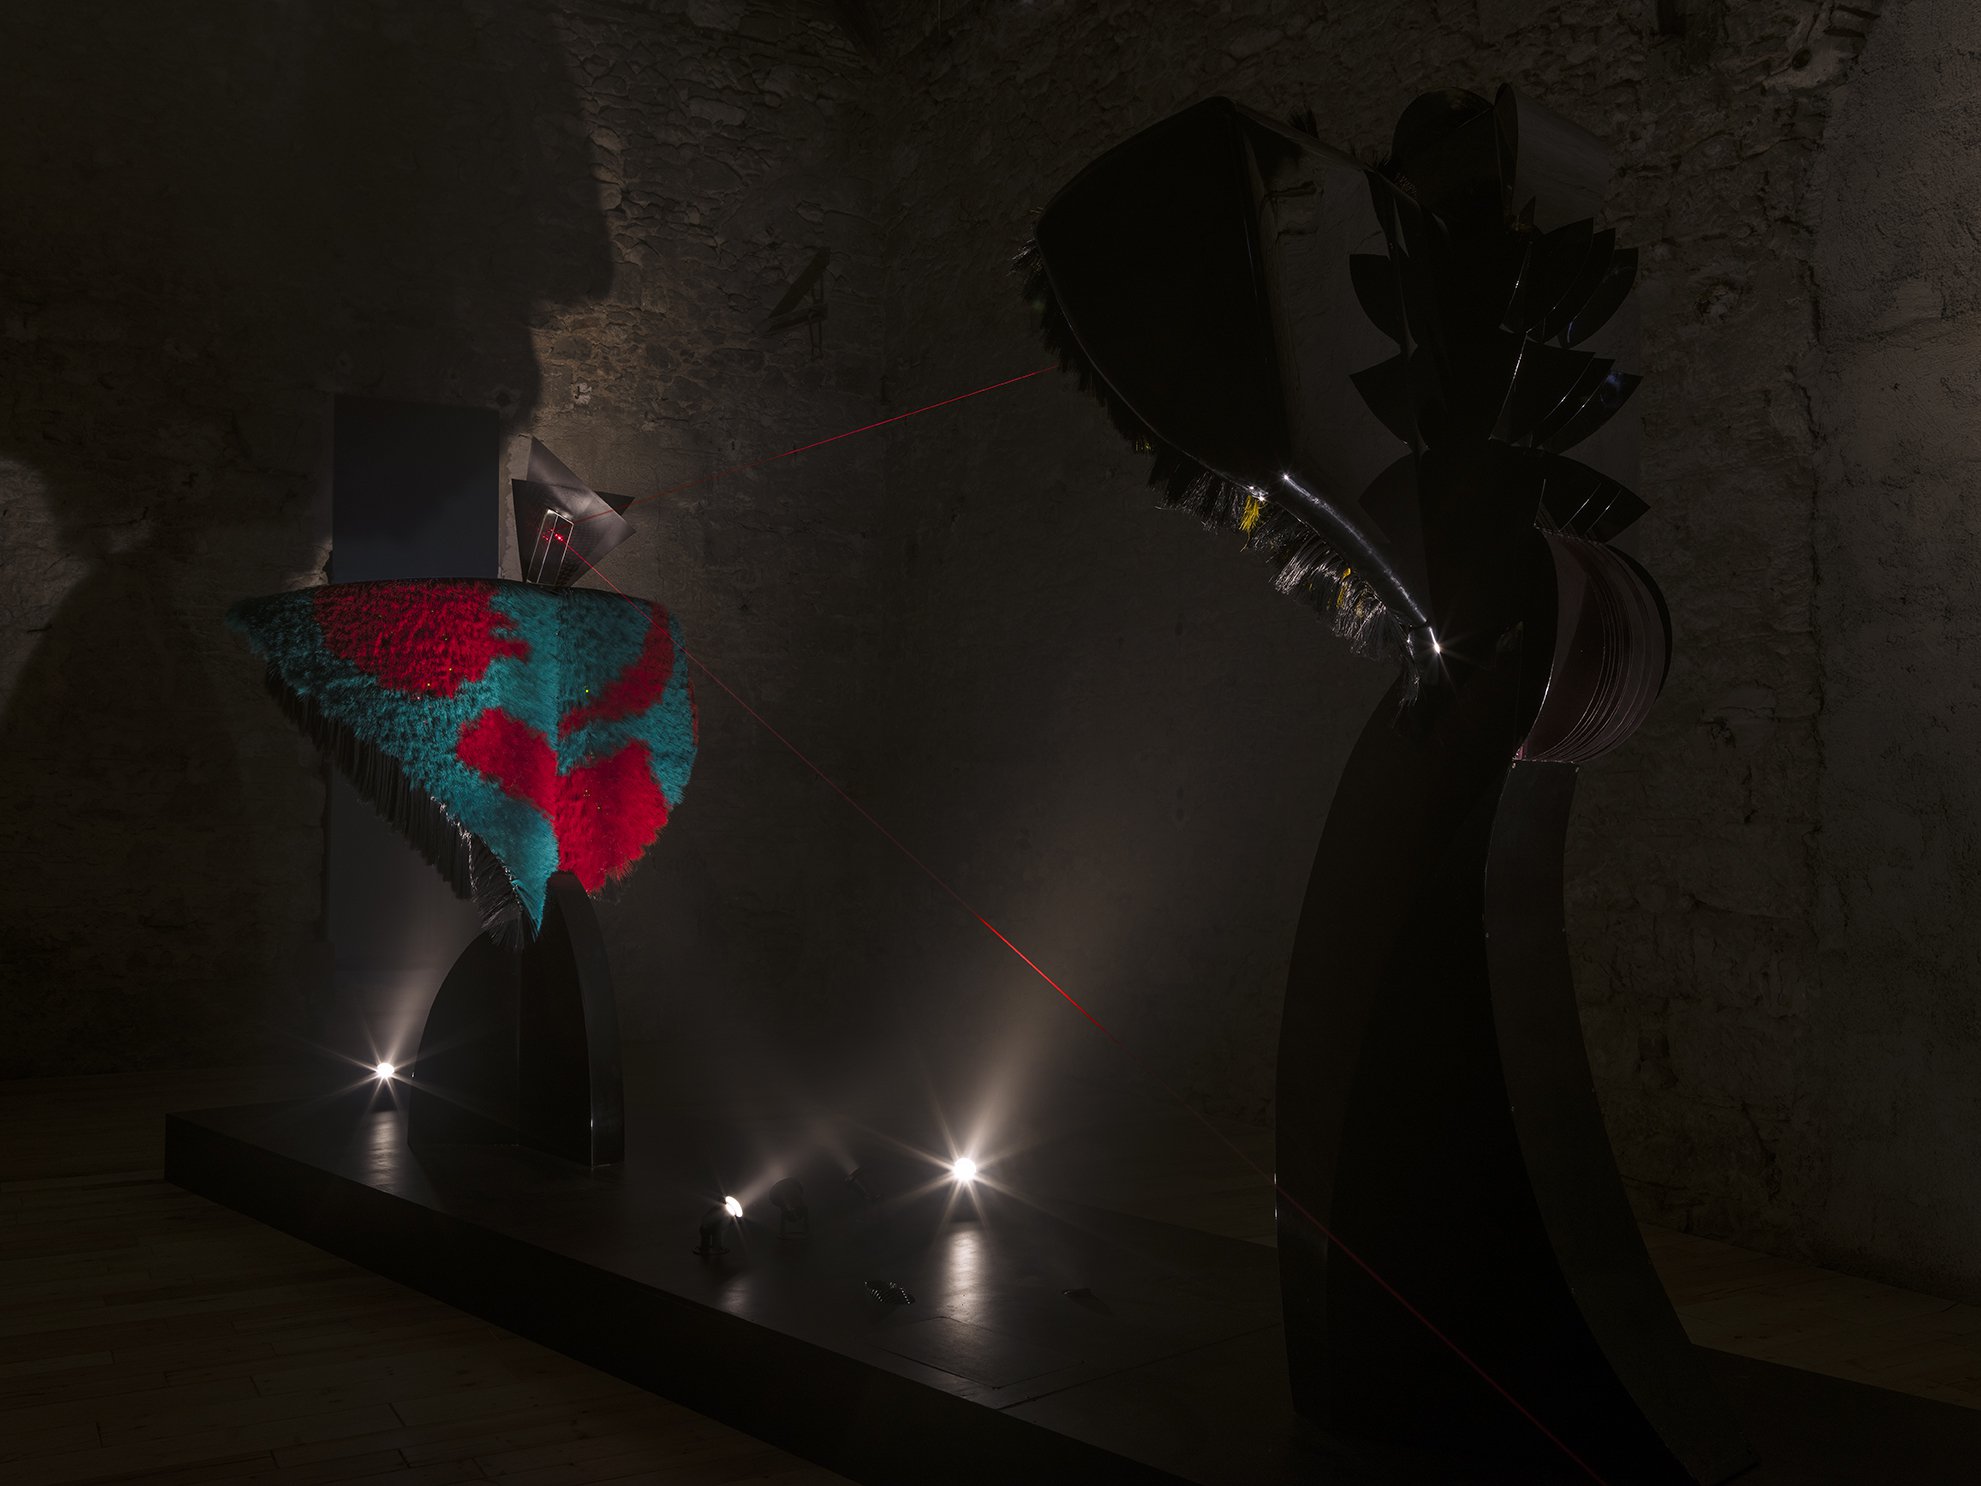 Liliane Lijn, Conjunction of Opposites: Woman of War and Lady of the Wild Things, installation of two mixed media performing sculptures, 400 x 800 x 400 cm, 1986. Installation view, Cosmic Dramas, Rodeo, Piraeus, 2018